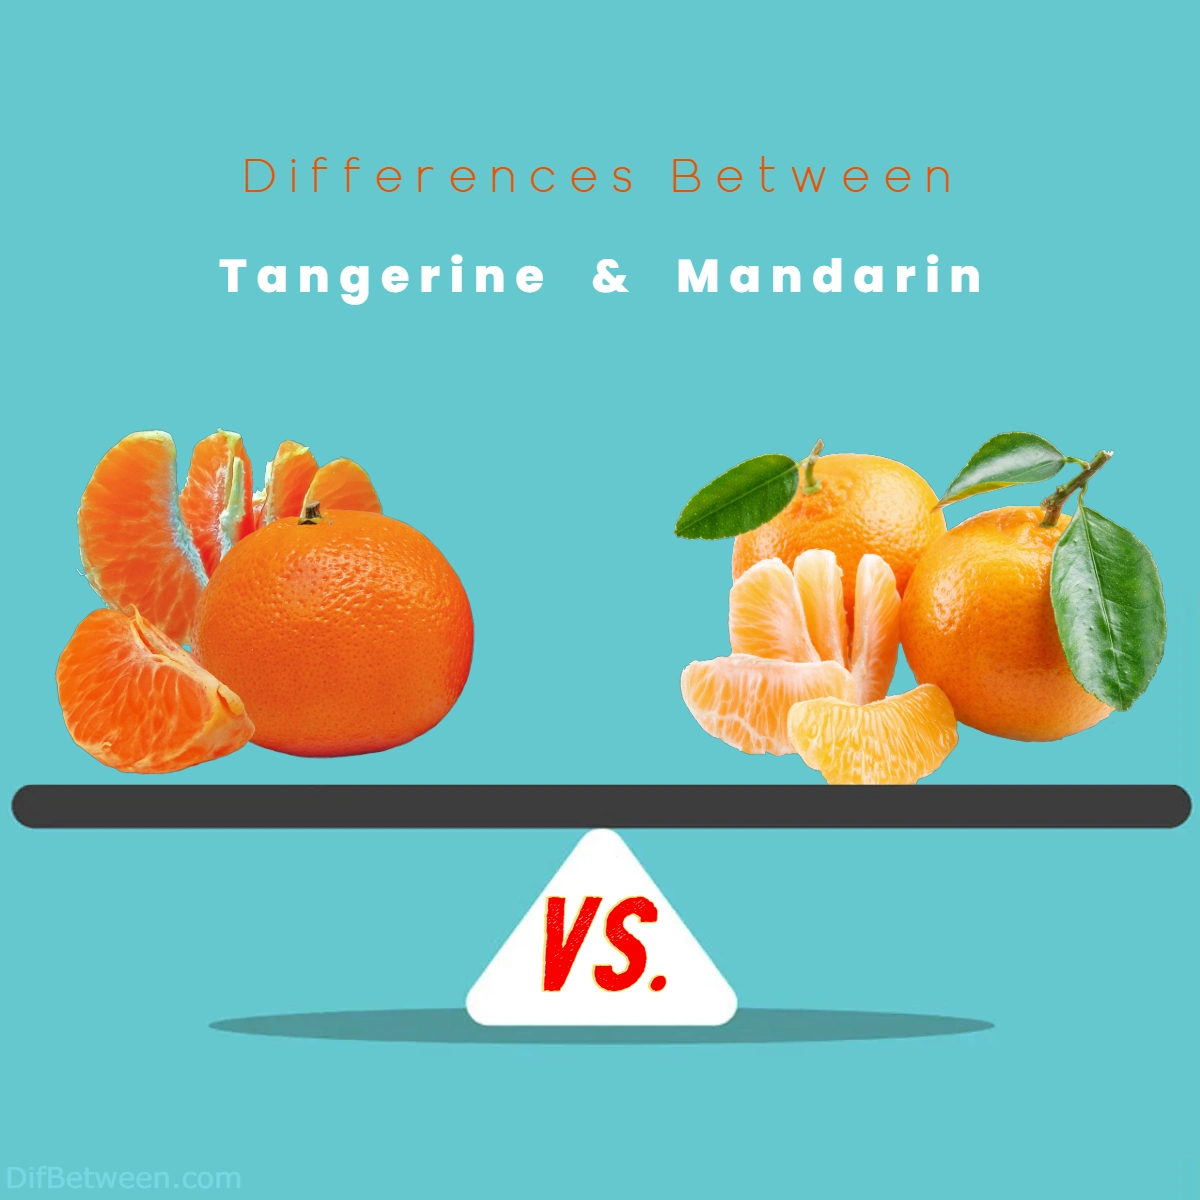 Difference Between Tangerine and Mandarin